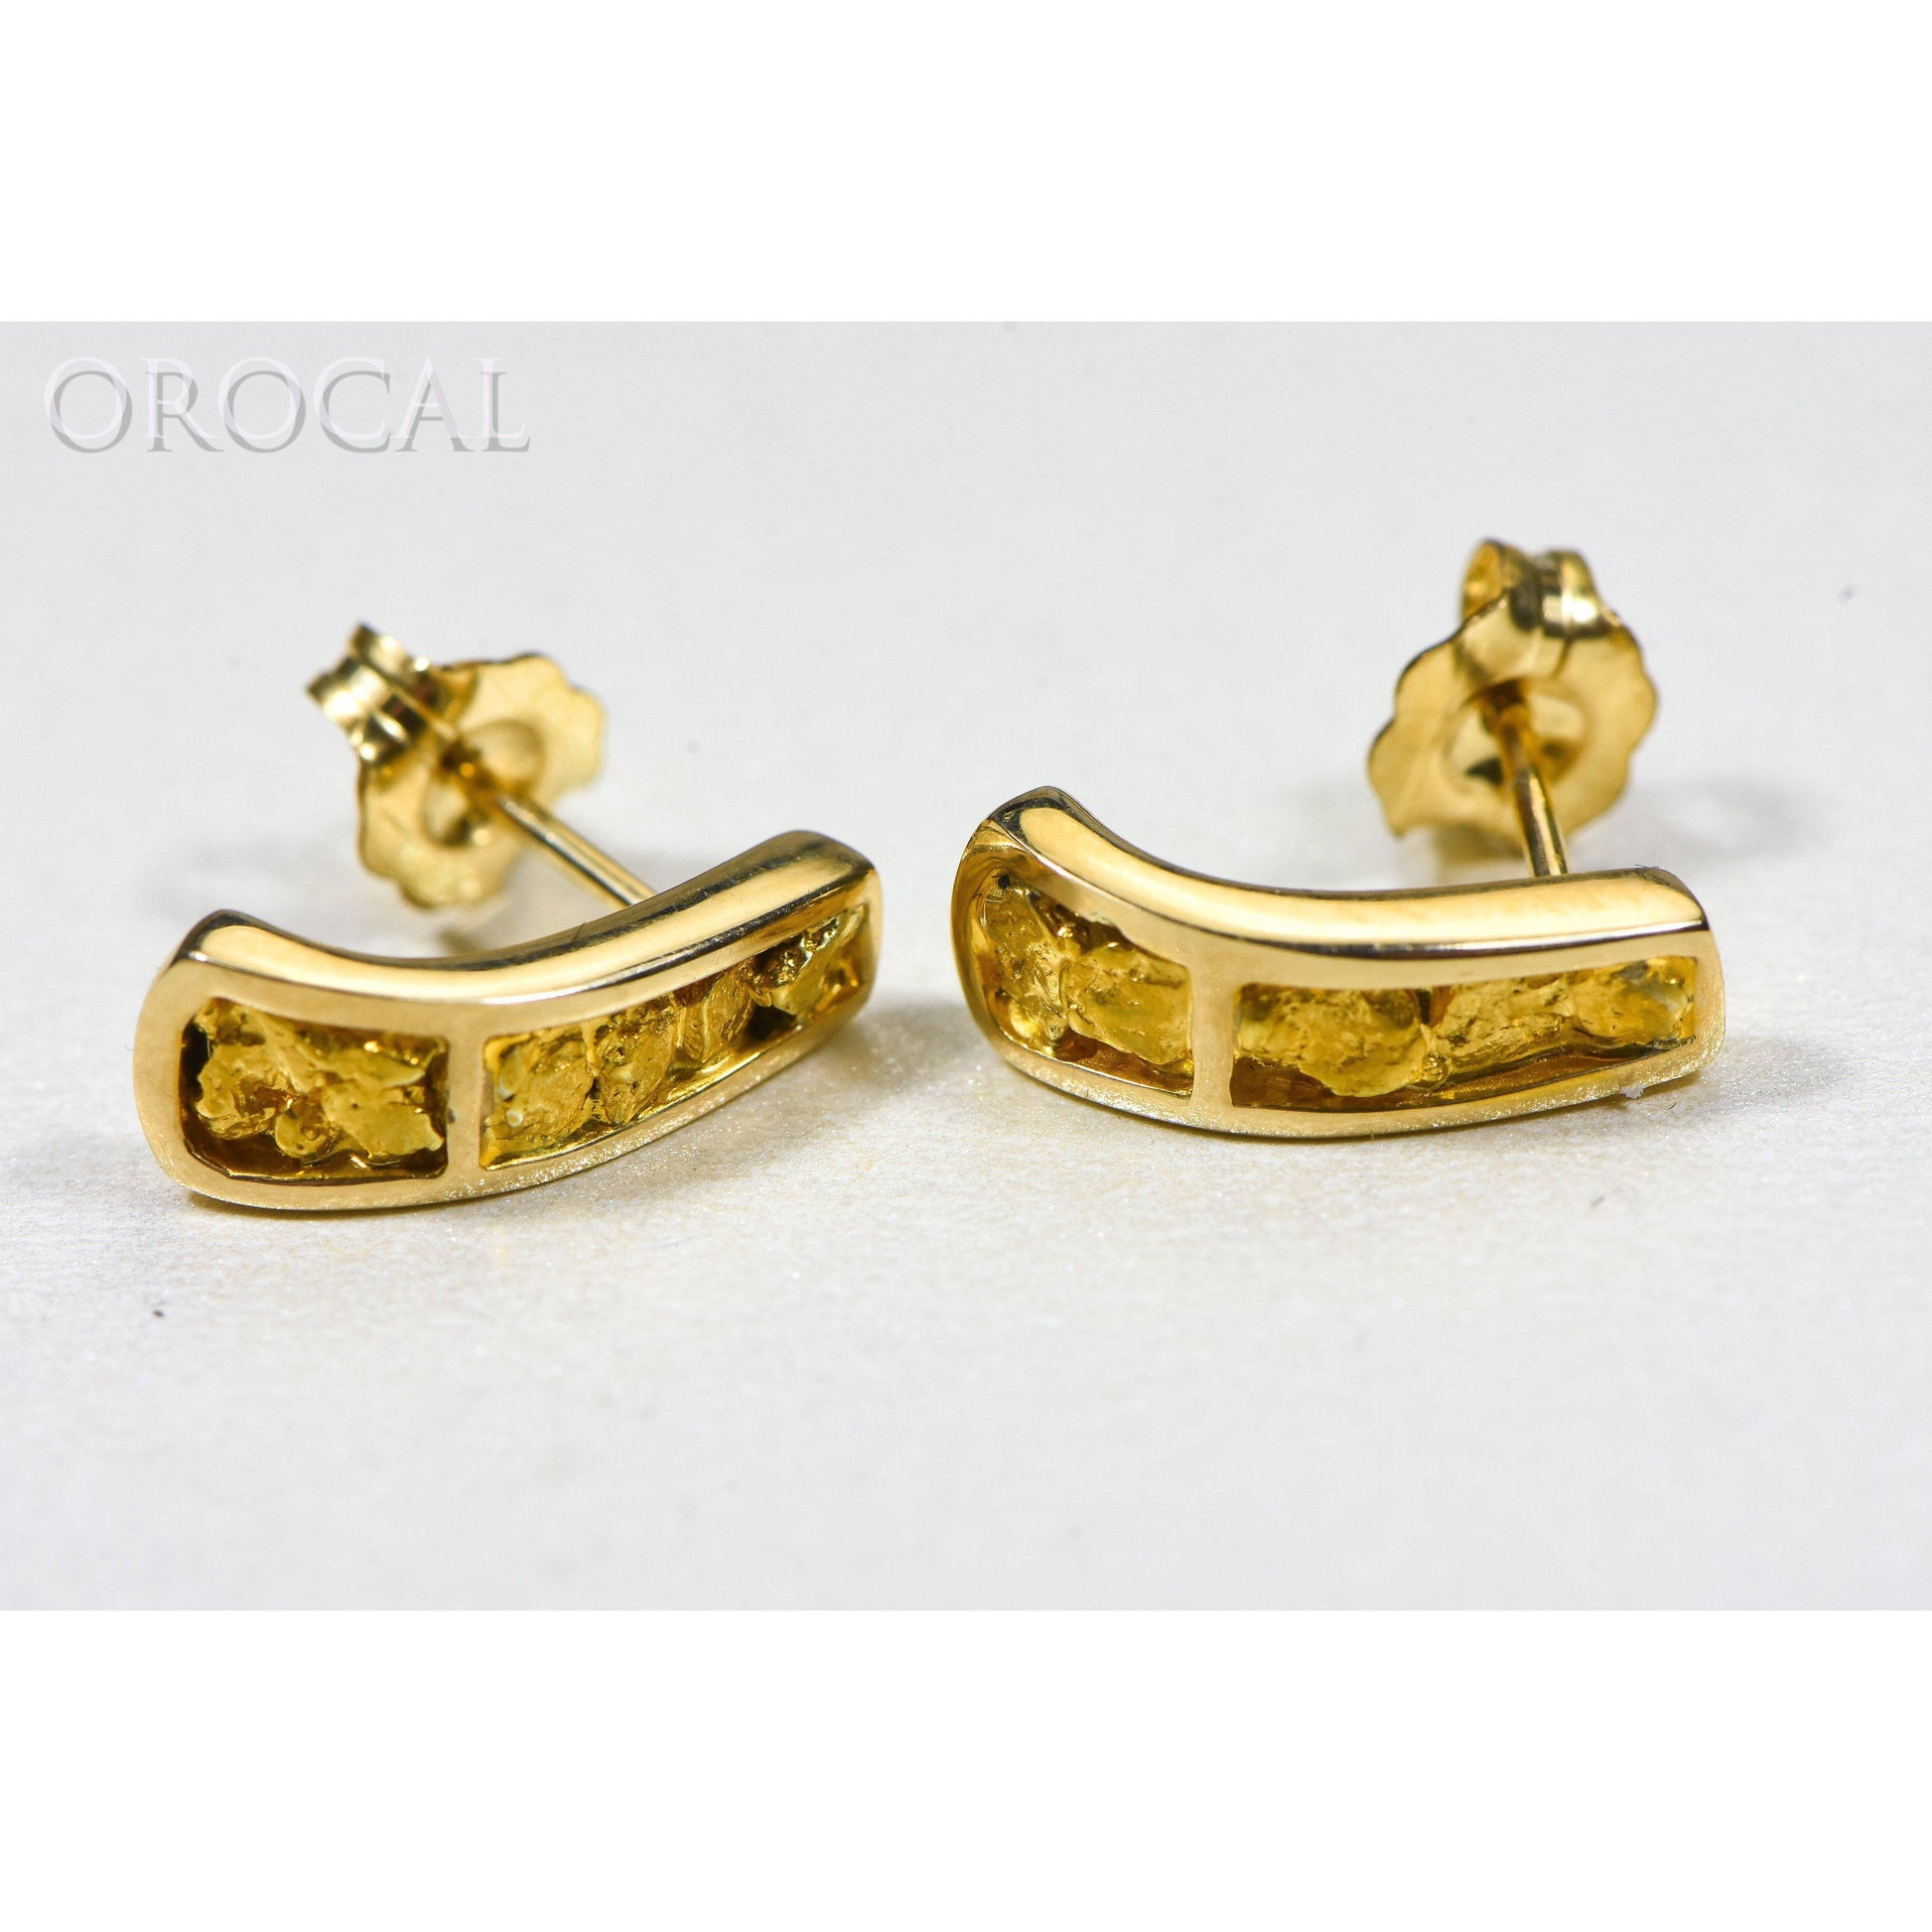 Orocal Gold Nugget Earrings EH41N-Destination Gold Detectors